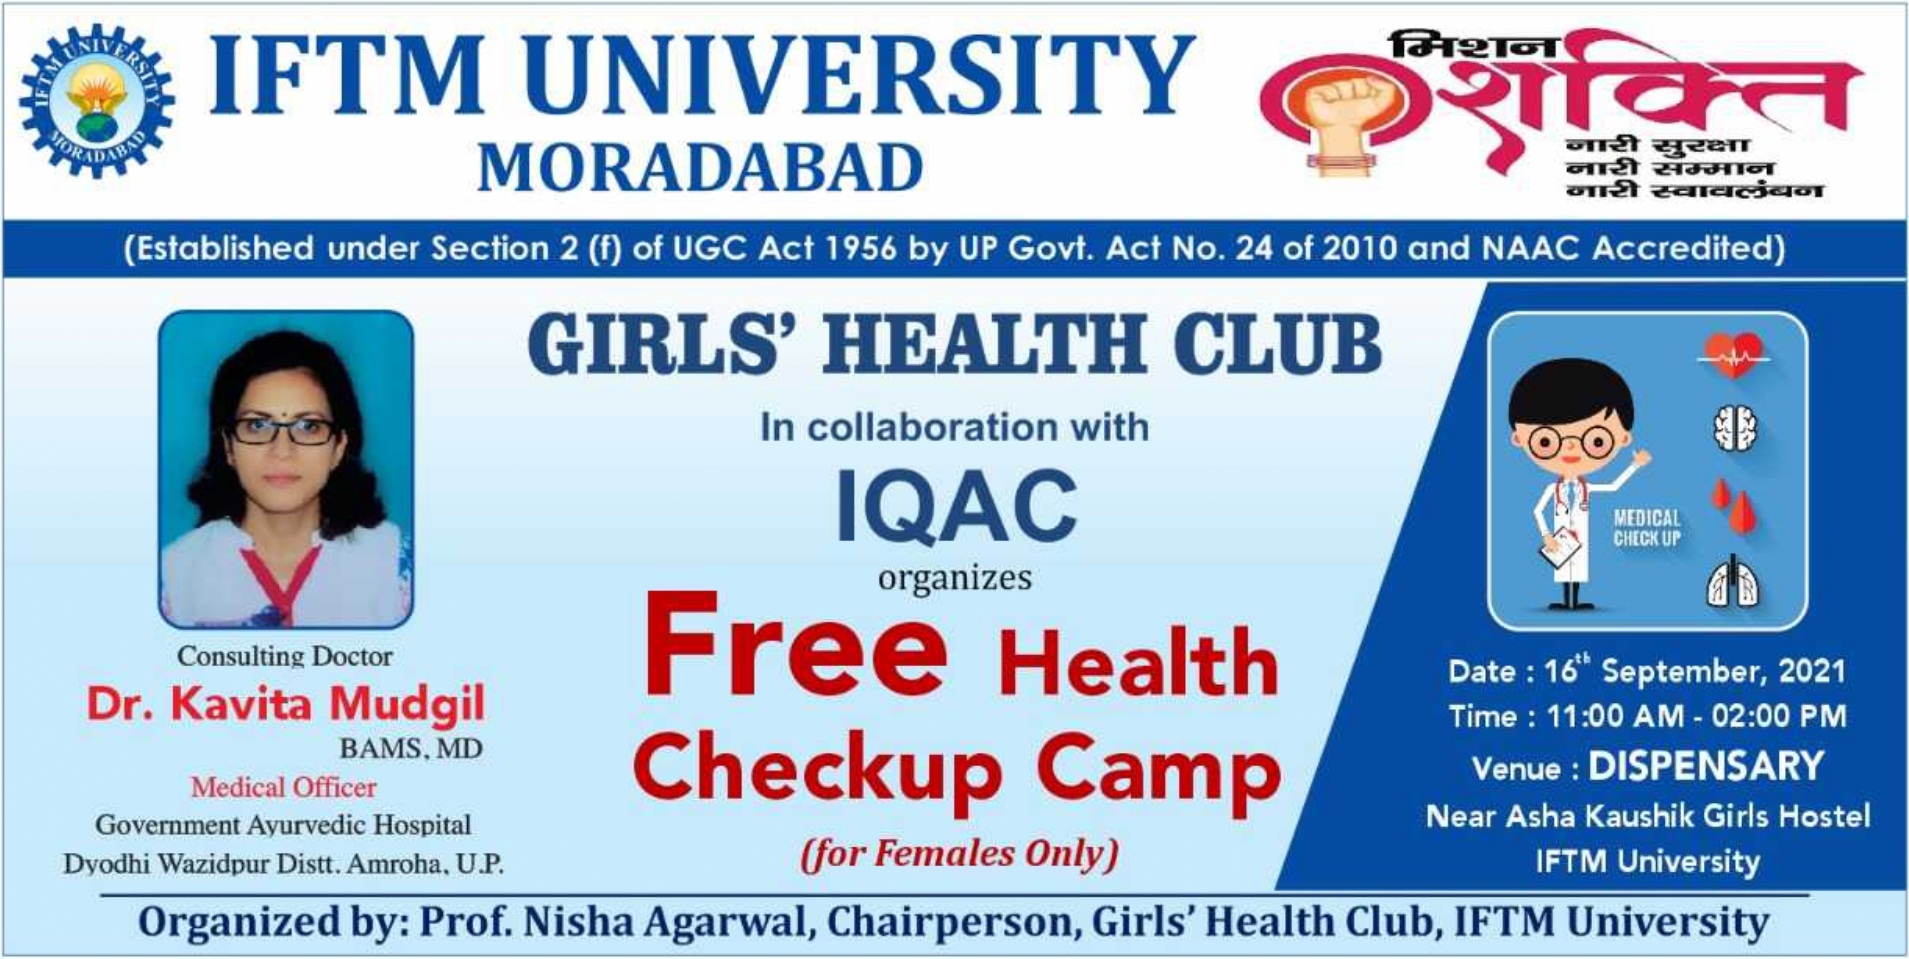 Free Health Checkup Camp (for Females Only)